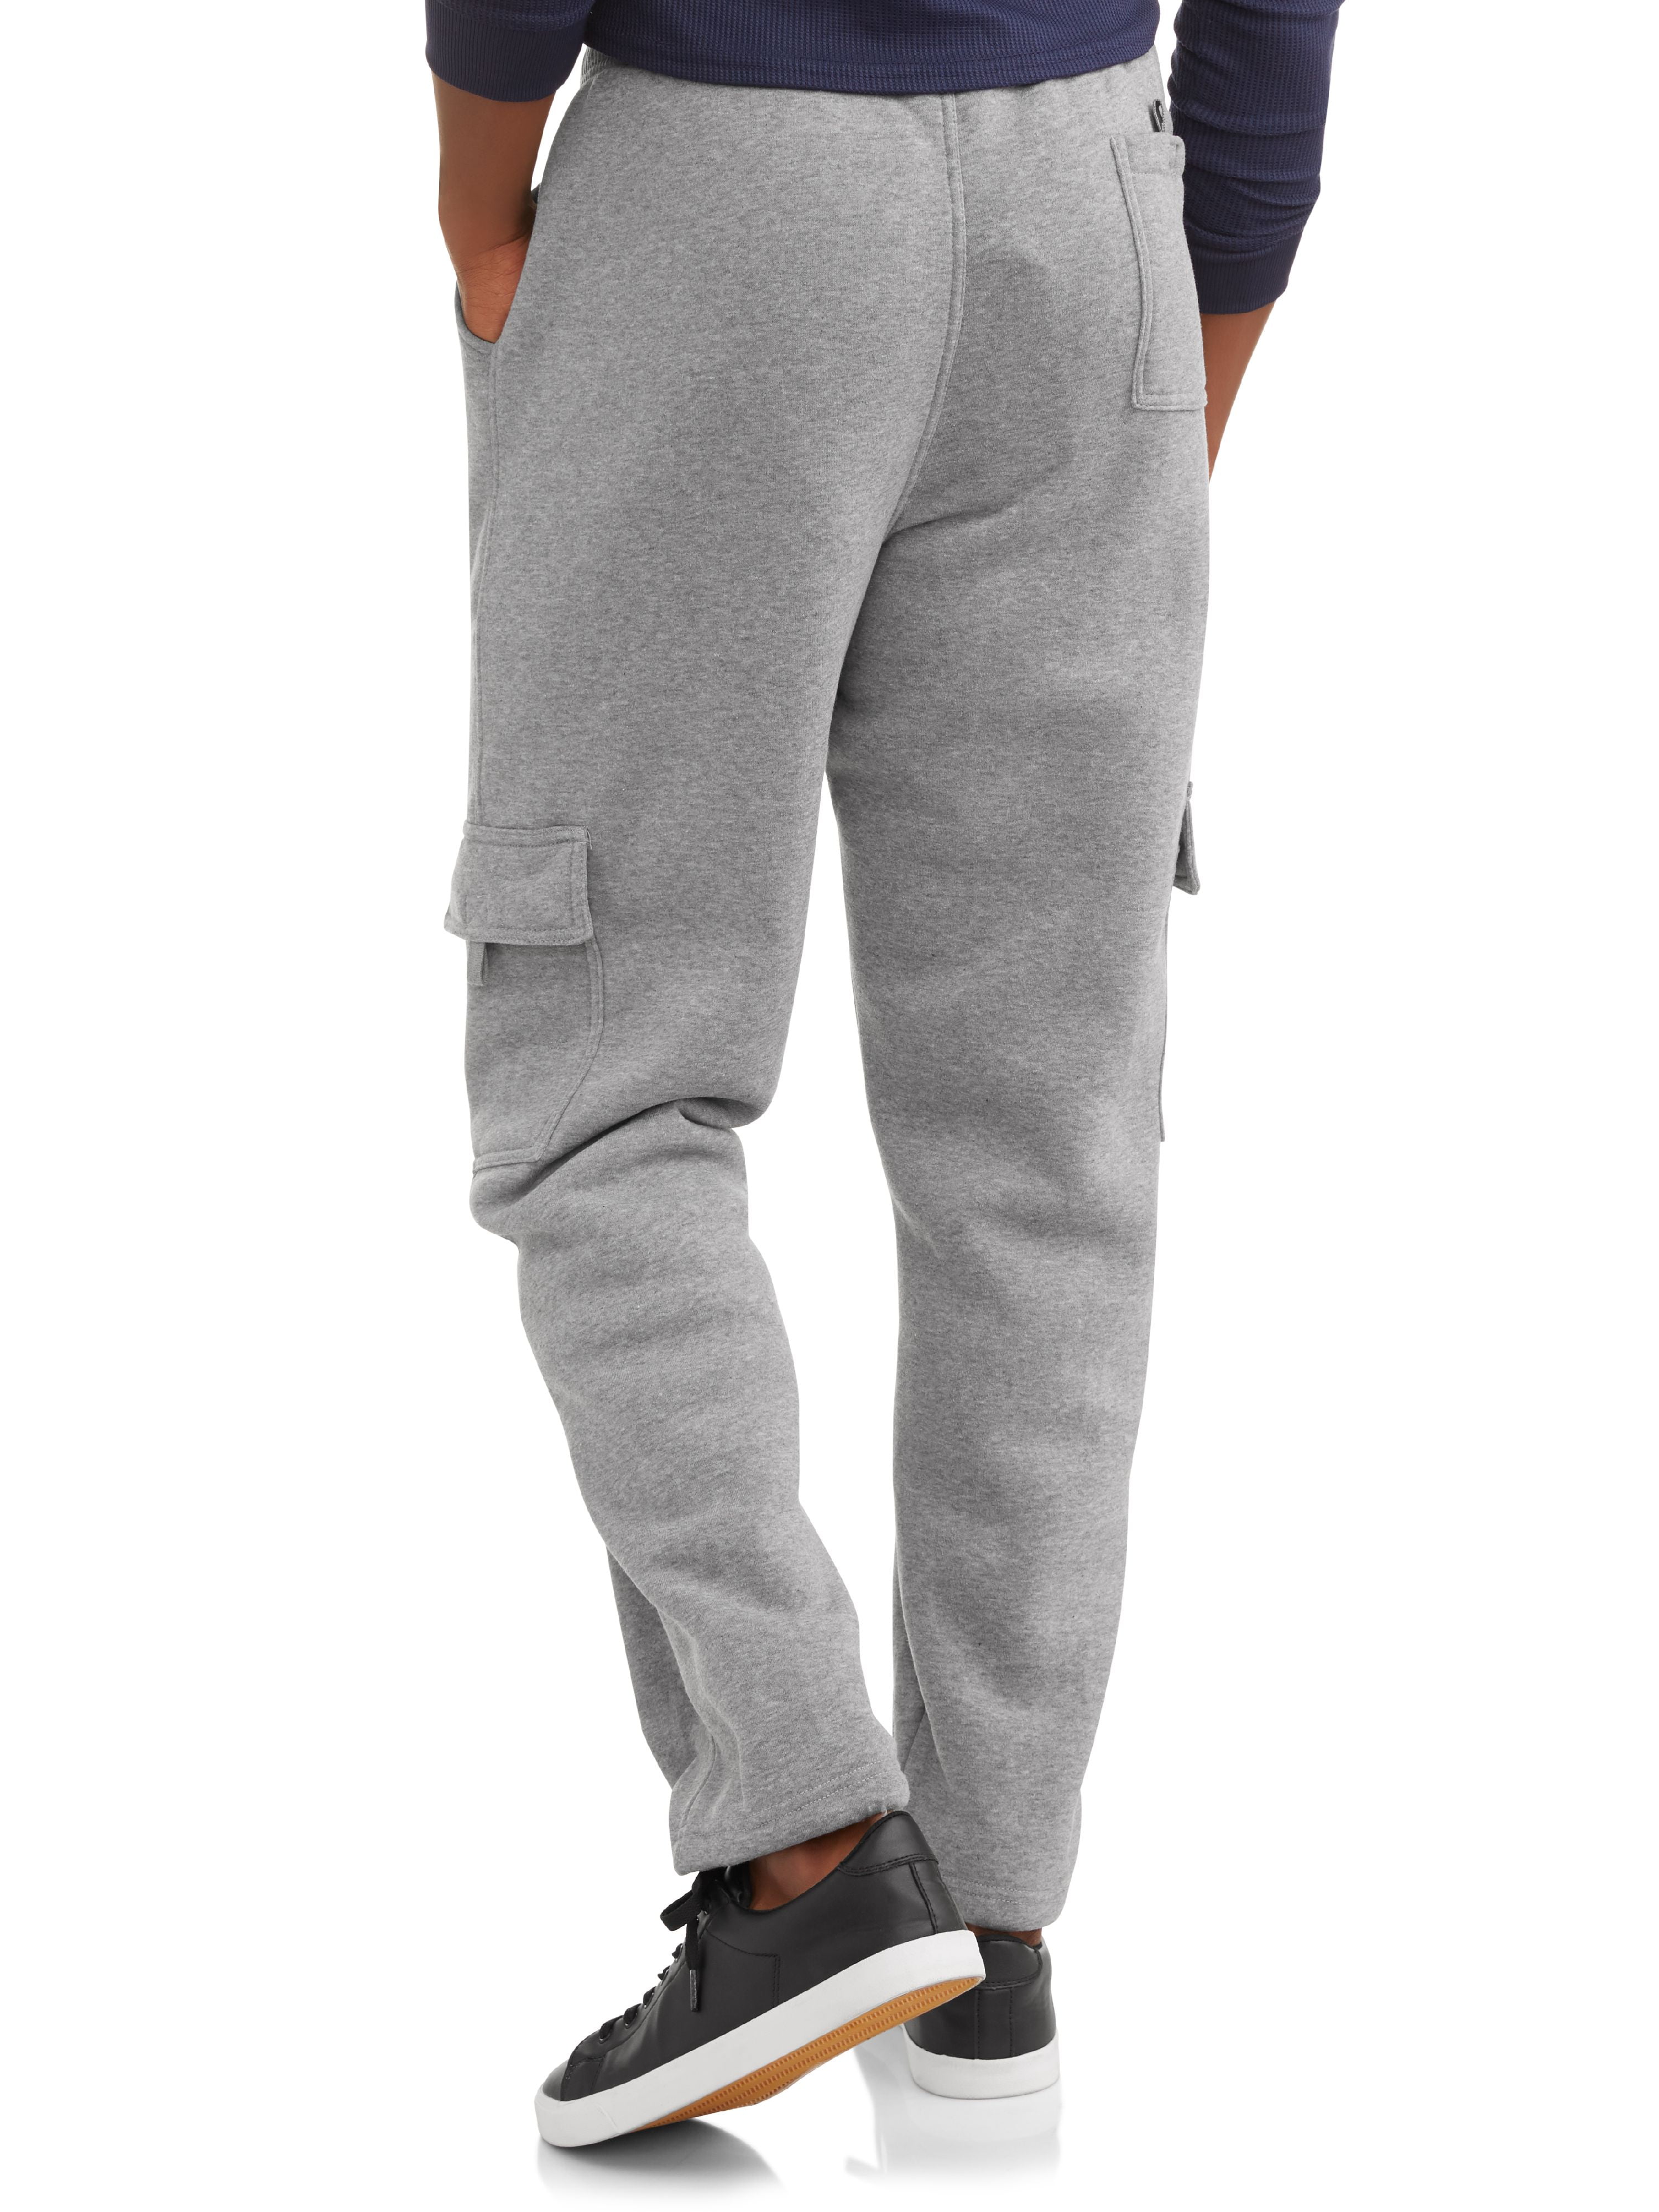 Climate Concepts Men's and Big Men's Fleece Cargo Pants, up to Size 5XL ...